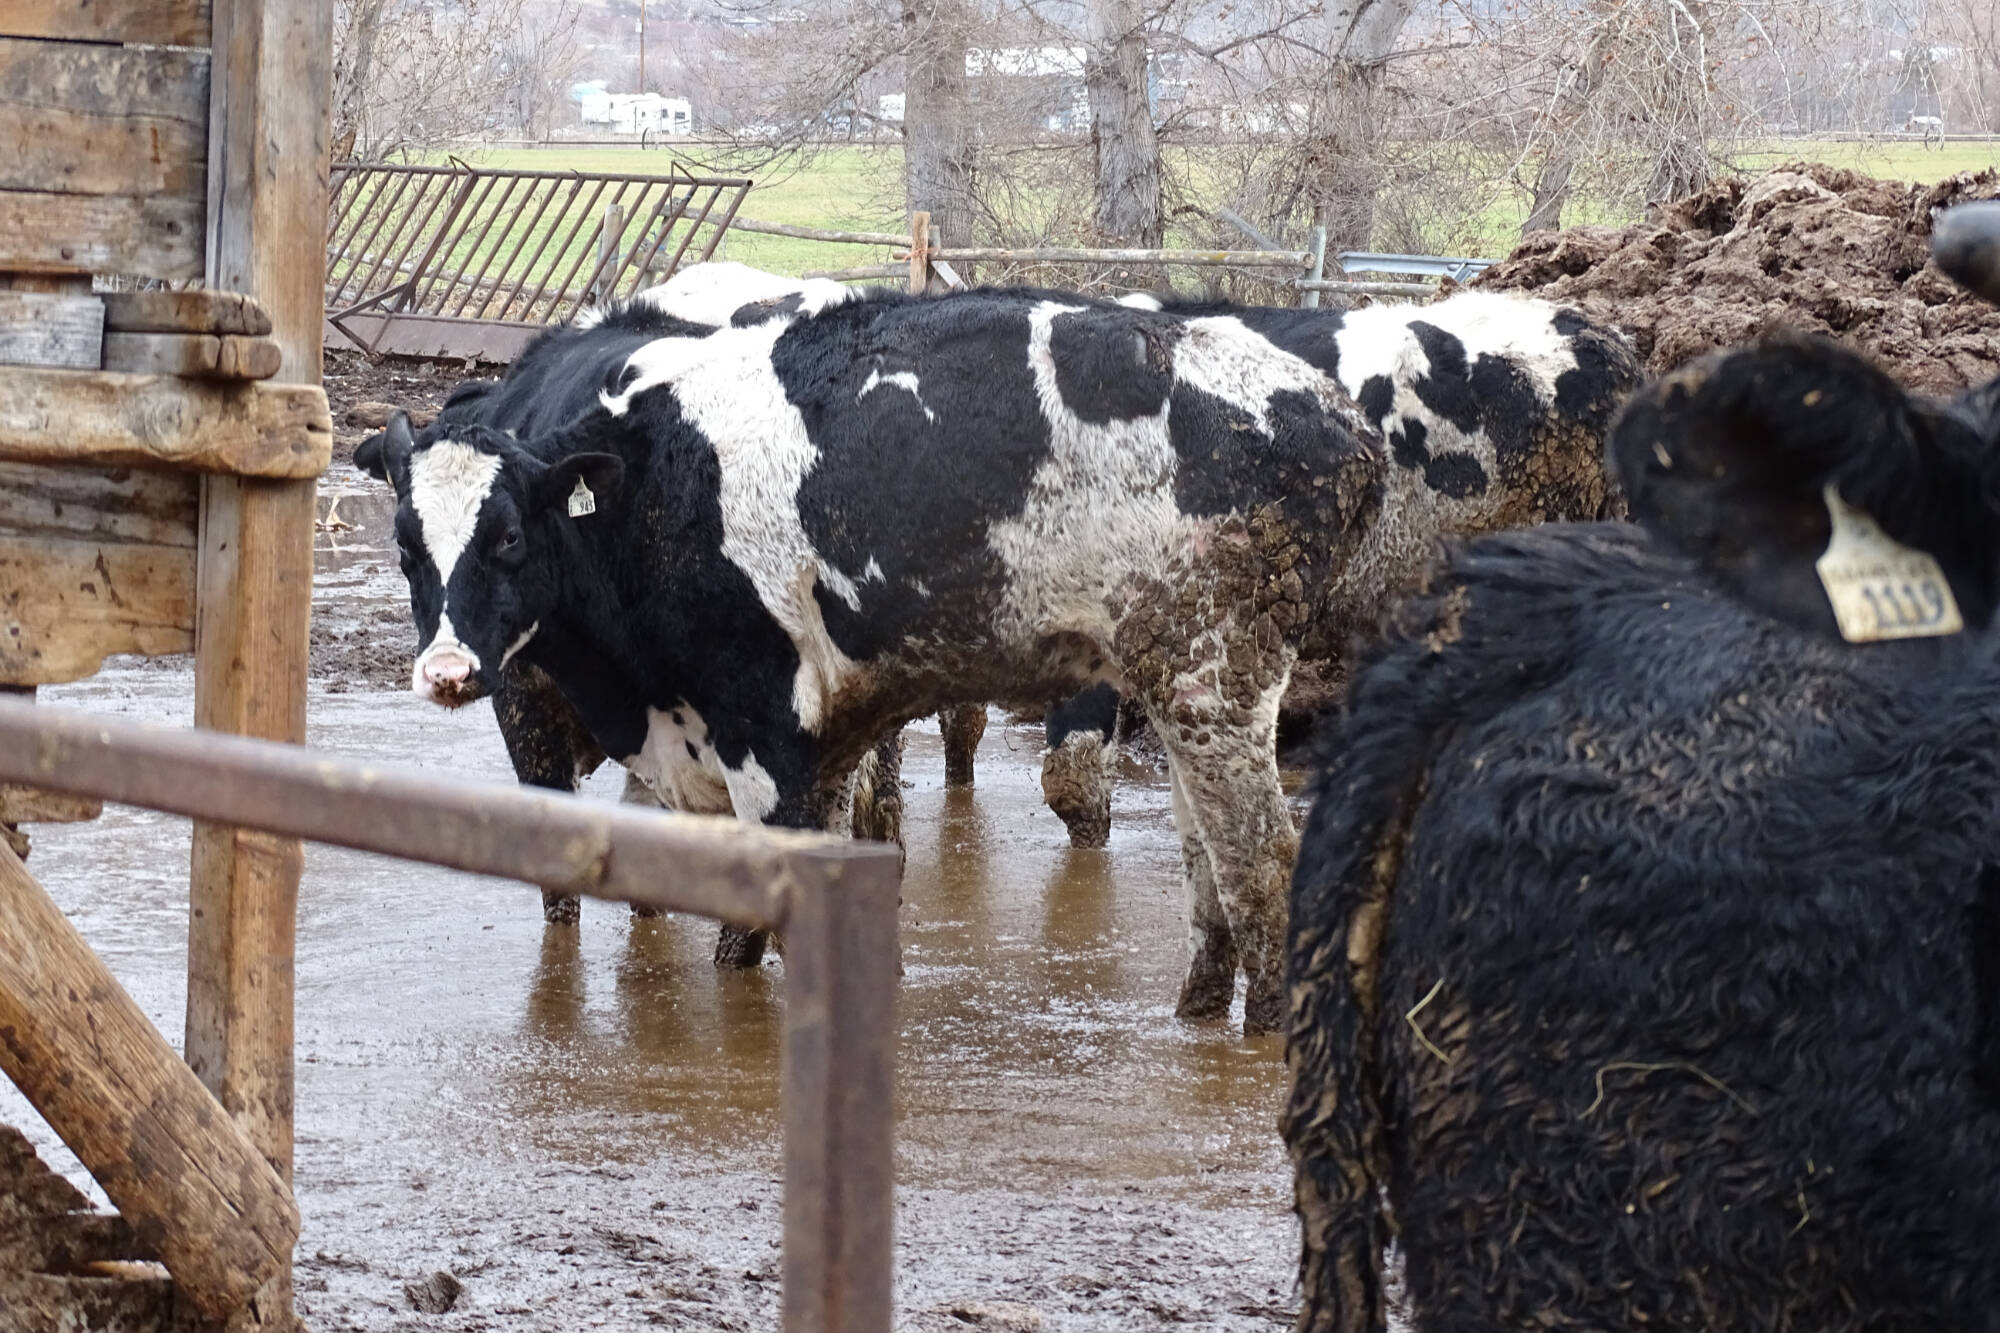 Close to 130 cattle being kept in 'deplorable' conditions were seized in January from a Cawston rancher. (BC SPCA)